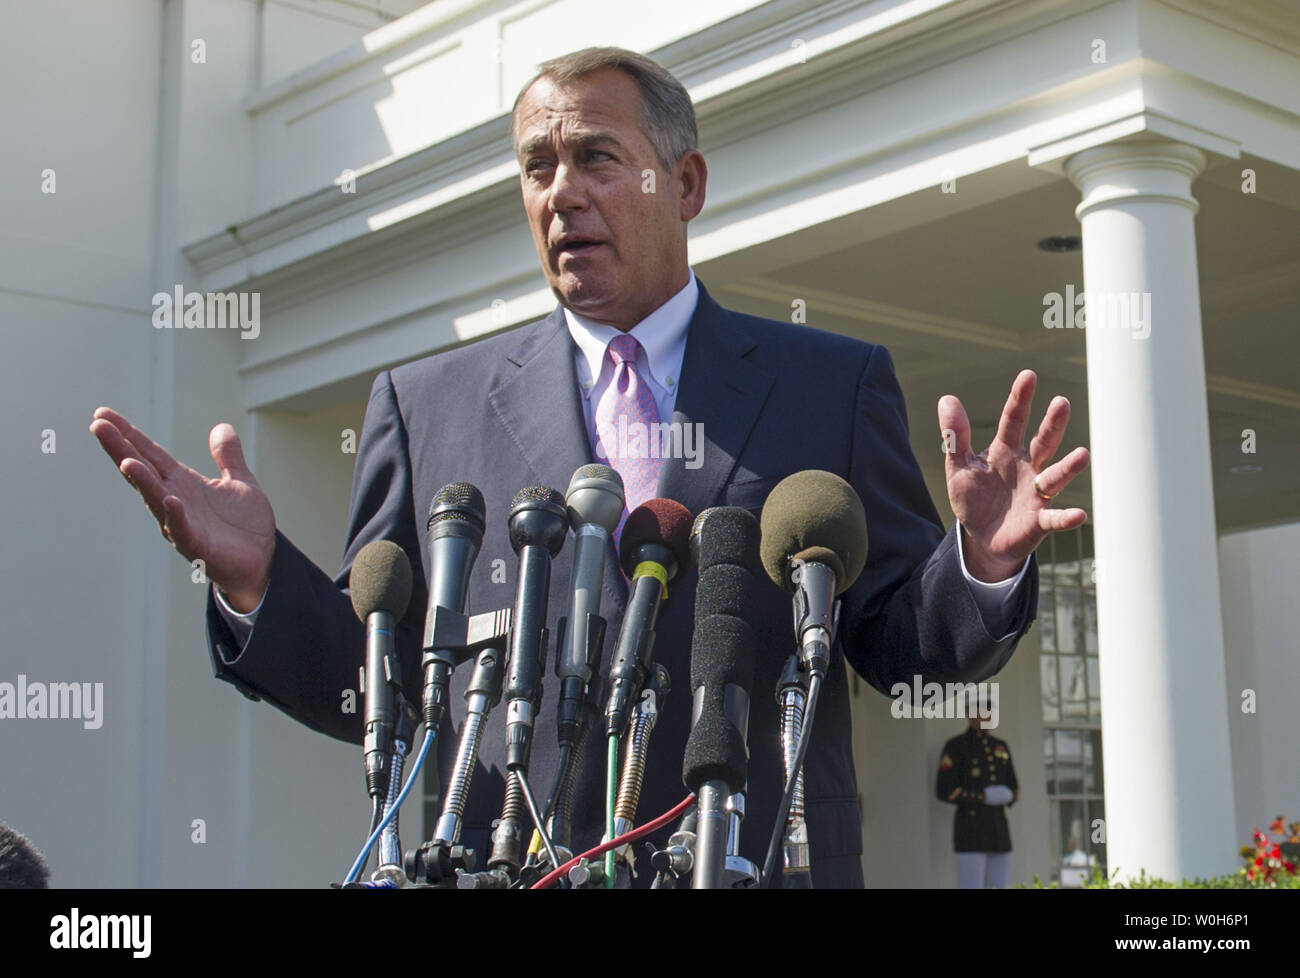 Speaker of the House John Boehner (R-OH) speaks to the media following a meeting with President Barack Obama on military action in Syria, at the White House in Washington, D.C. on September 3, 2013. Obama is weighing the use of military force in reaction to the allegations that the Assad regime used chemical weapons on rebels.  UPI/Kevin Dietsch Stock Photo